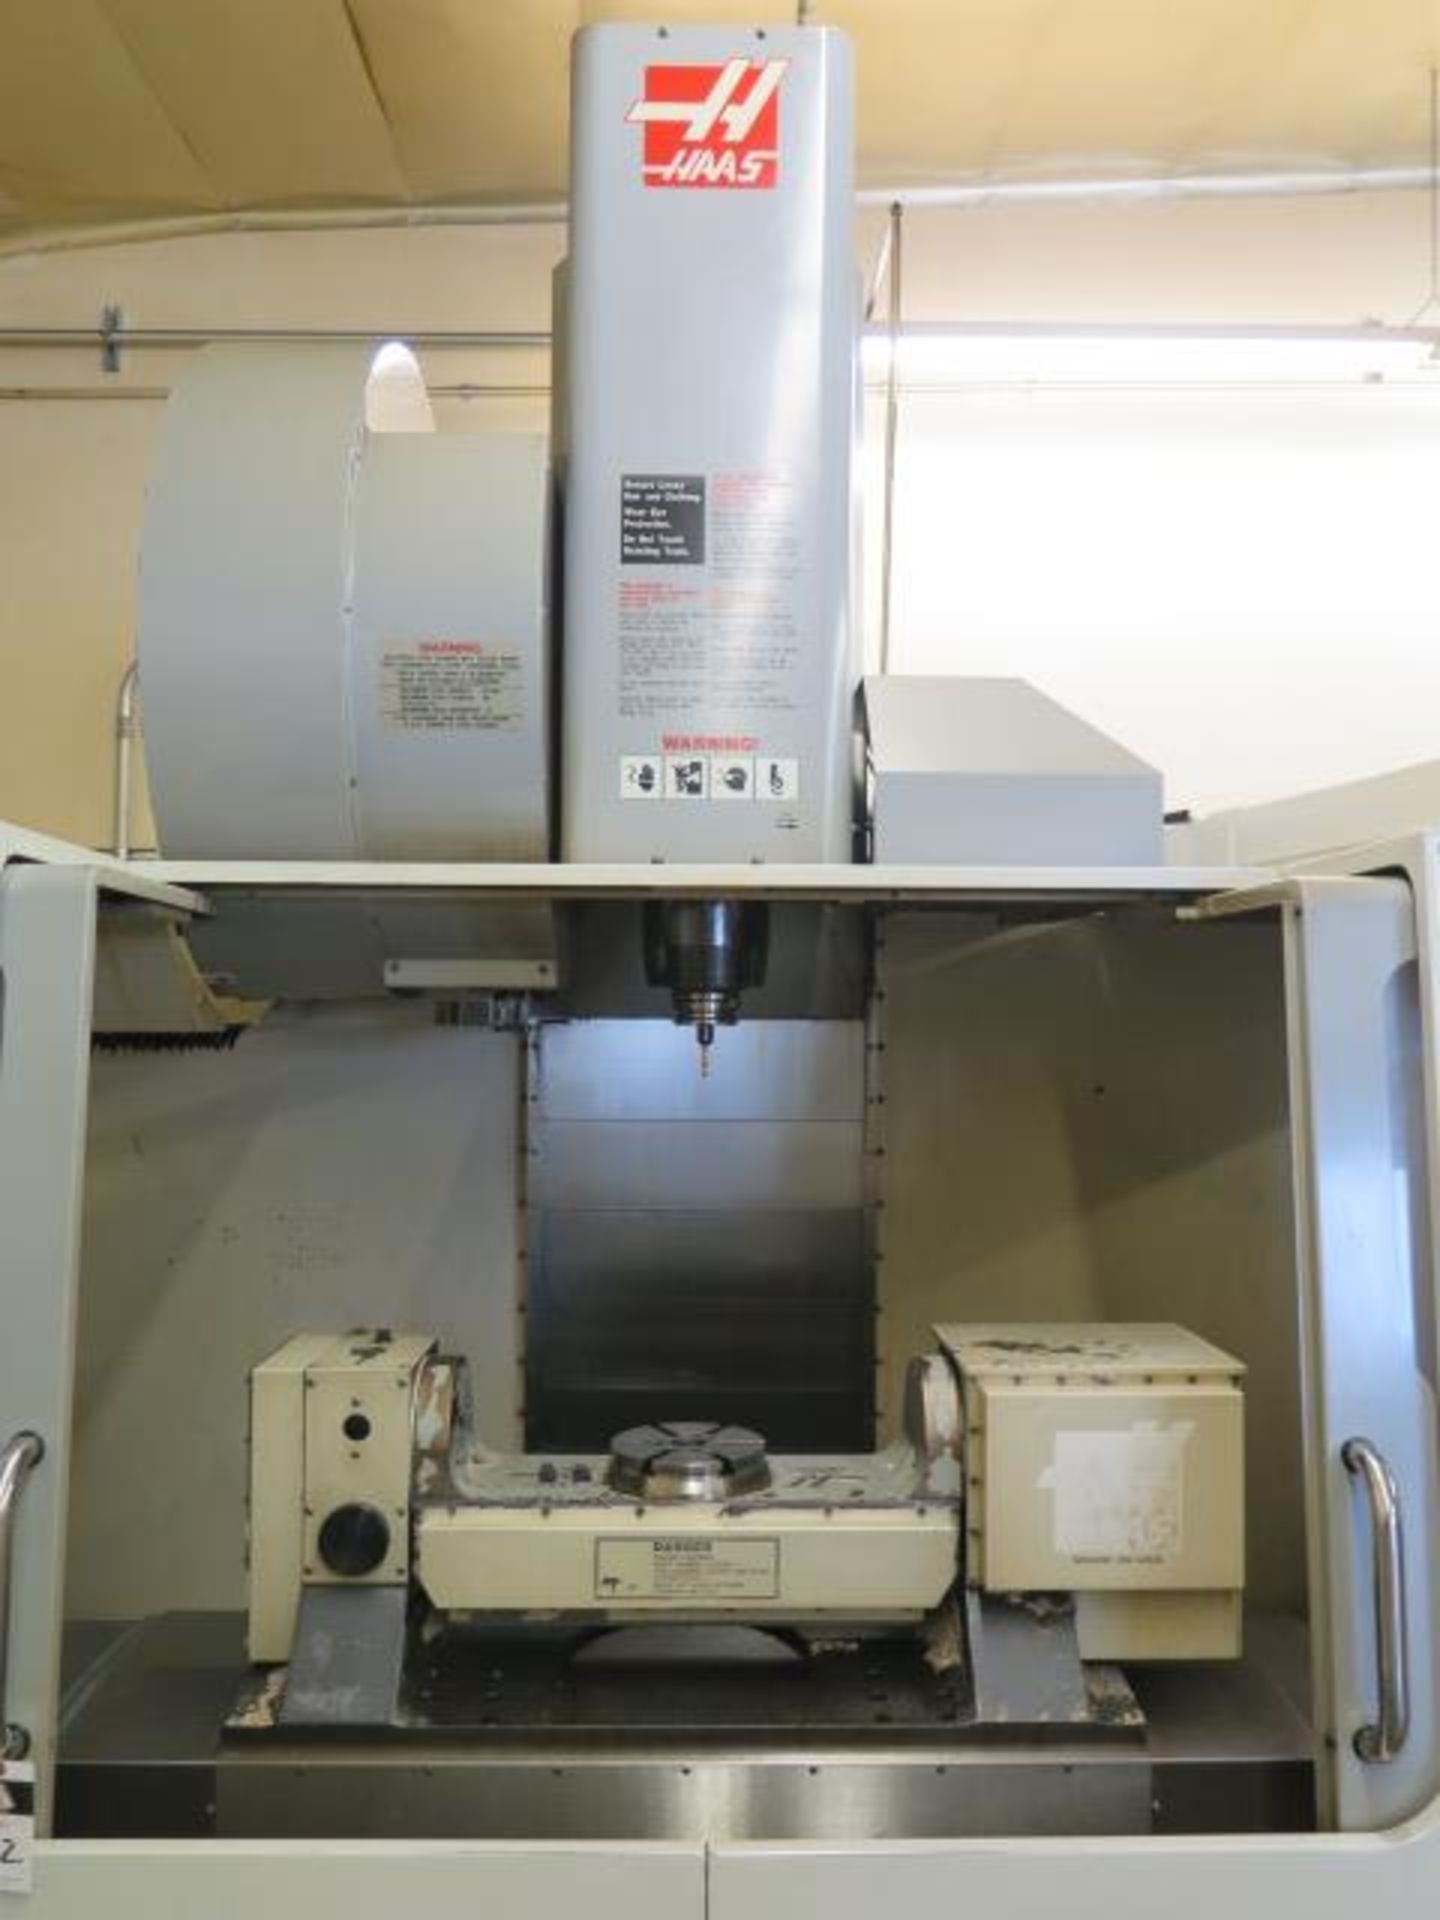 2005 Haas VF5/50TR 5-Axis Trunnion CNC VMC s/n 45847 w/ Haas Controls, 30-Station ATC, SOLD AS IS - Image 4 of 24